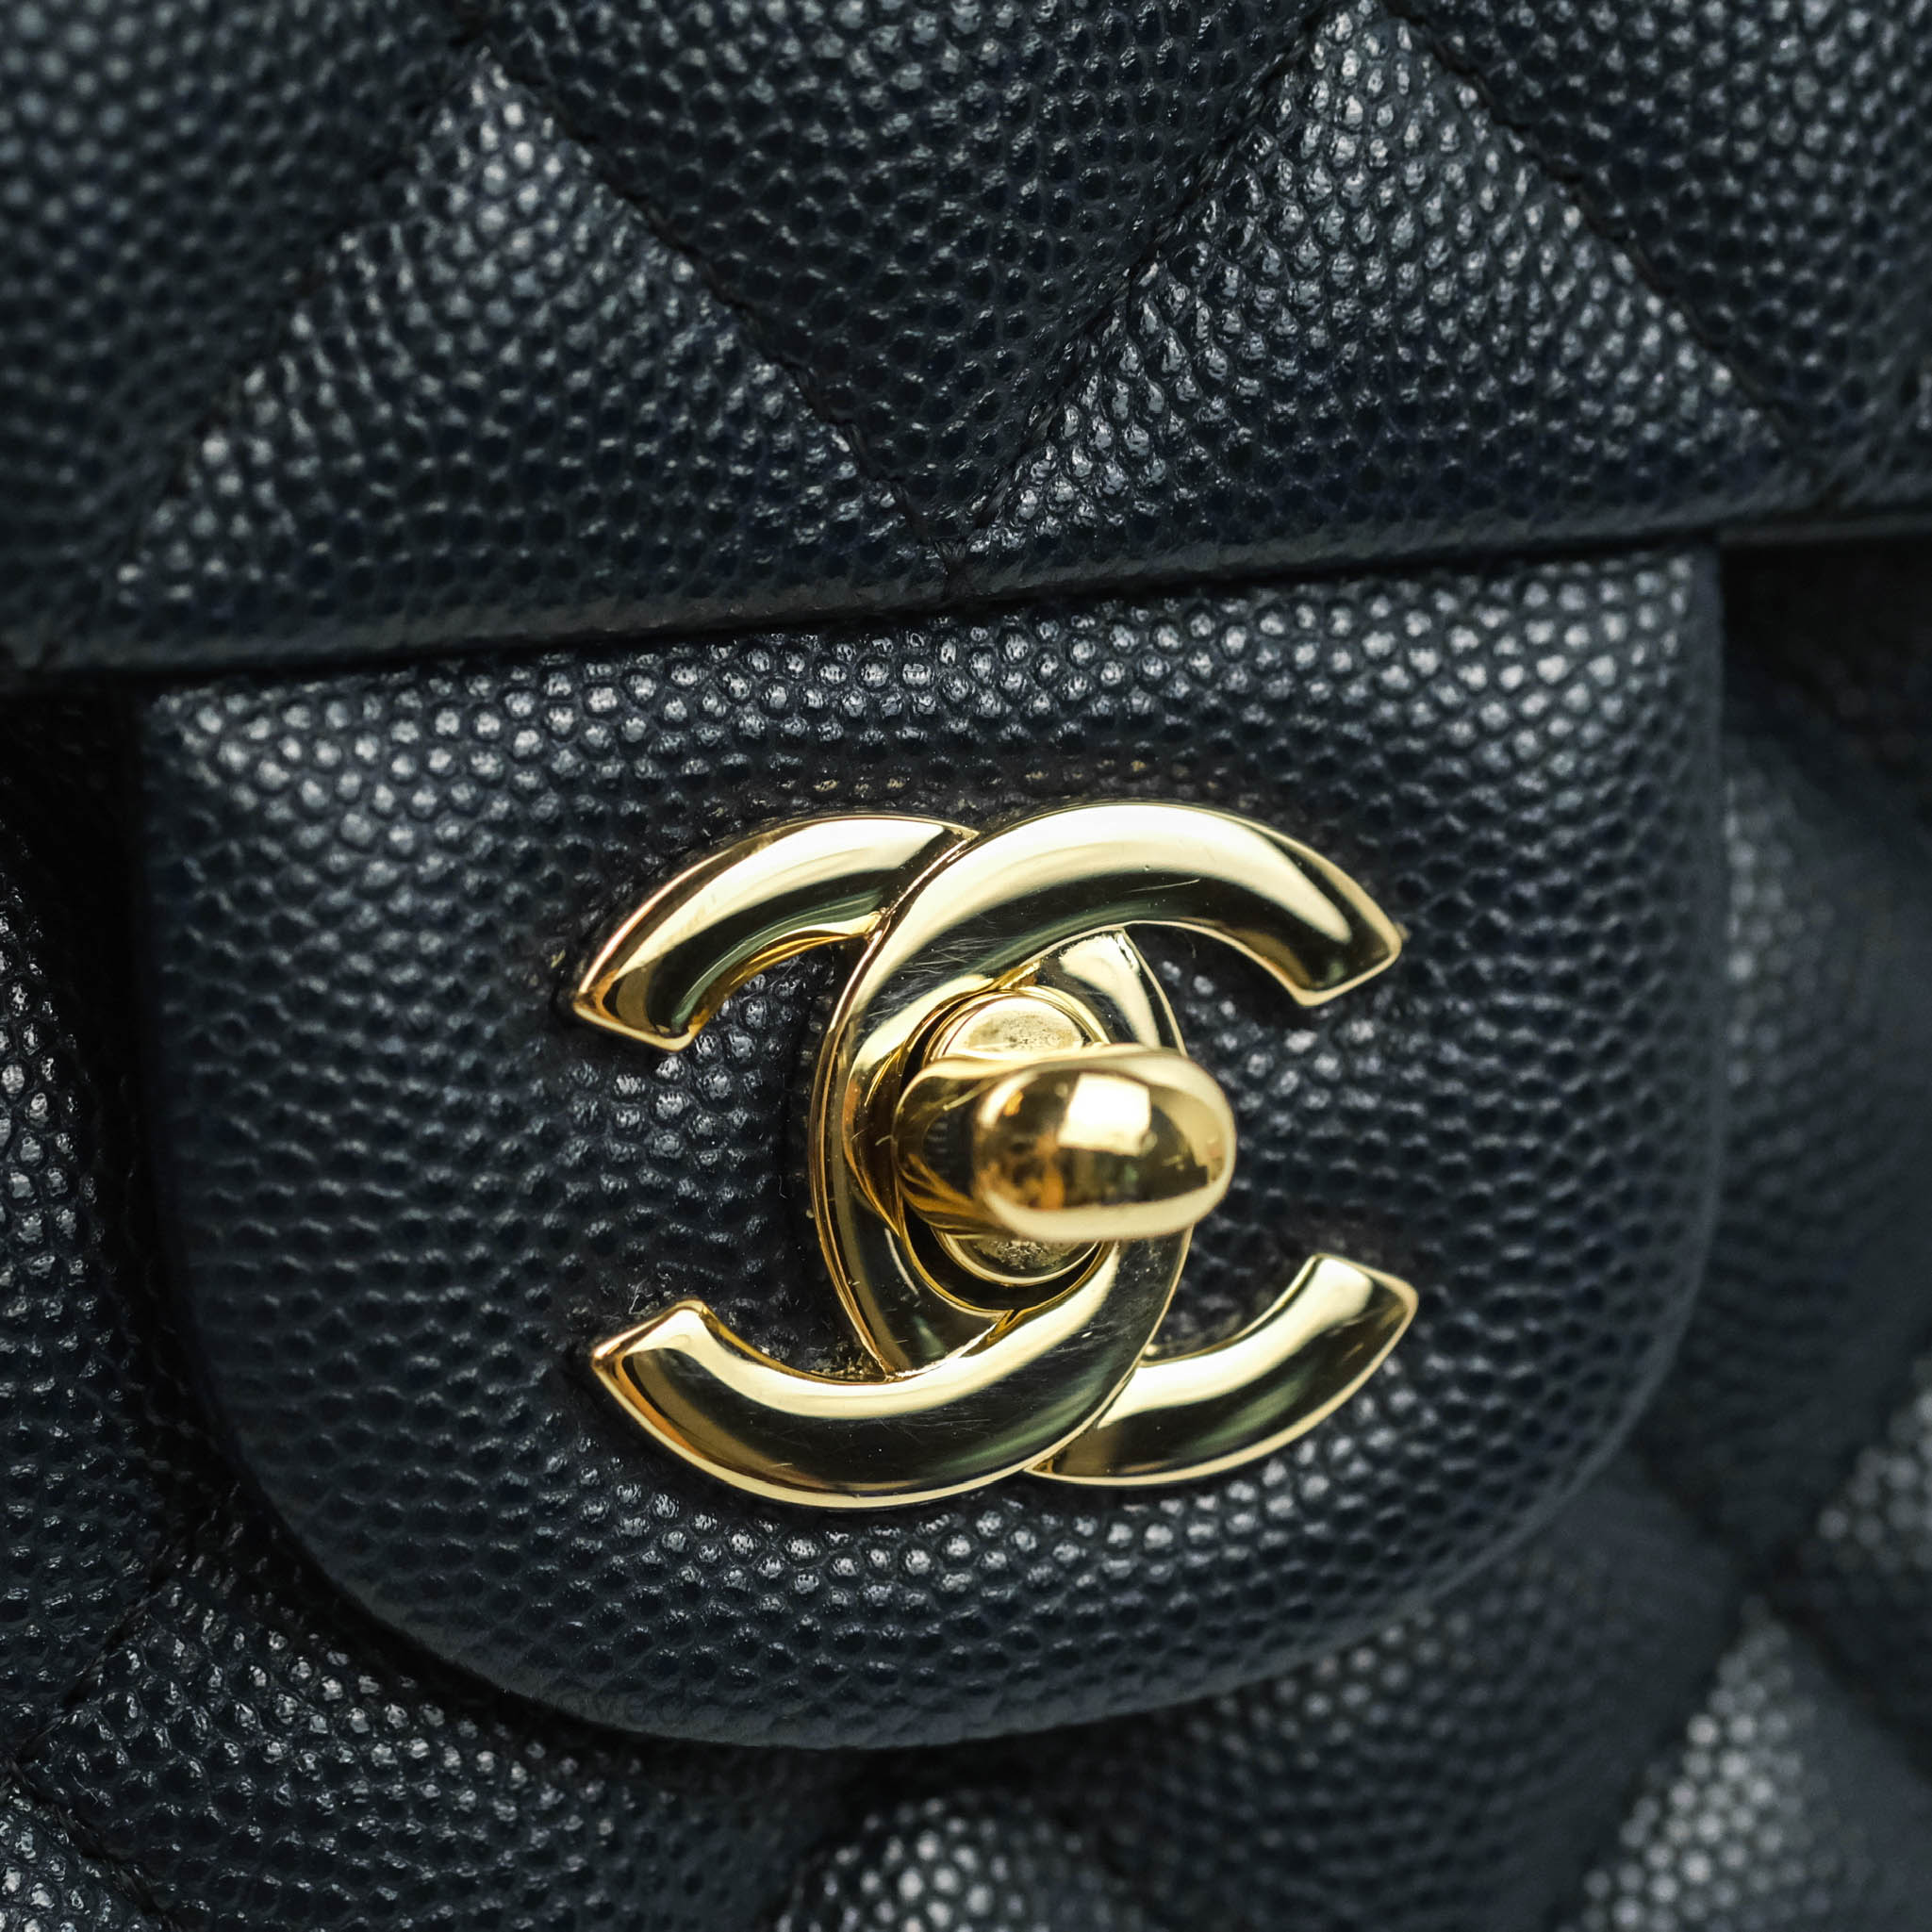 CHANEL, Bags, Chanel Black Lambskin Leather Vanity Bag With Chain